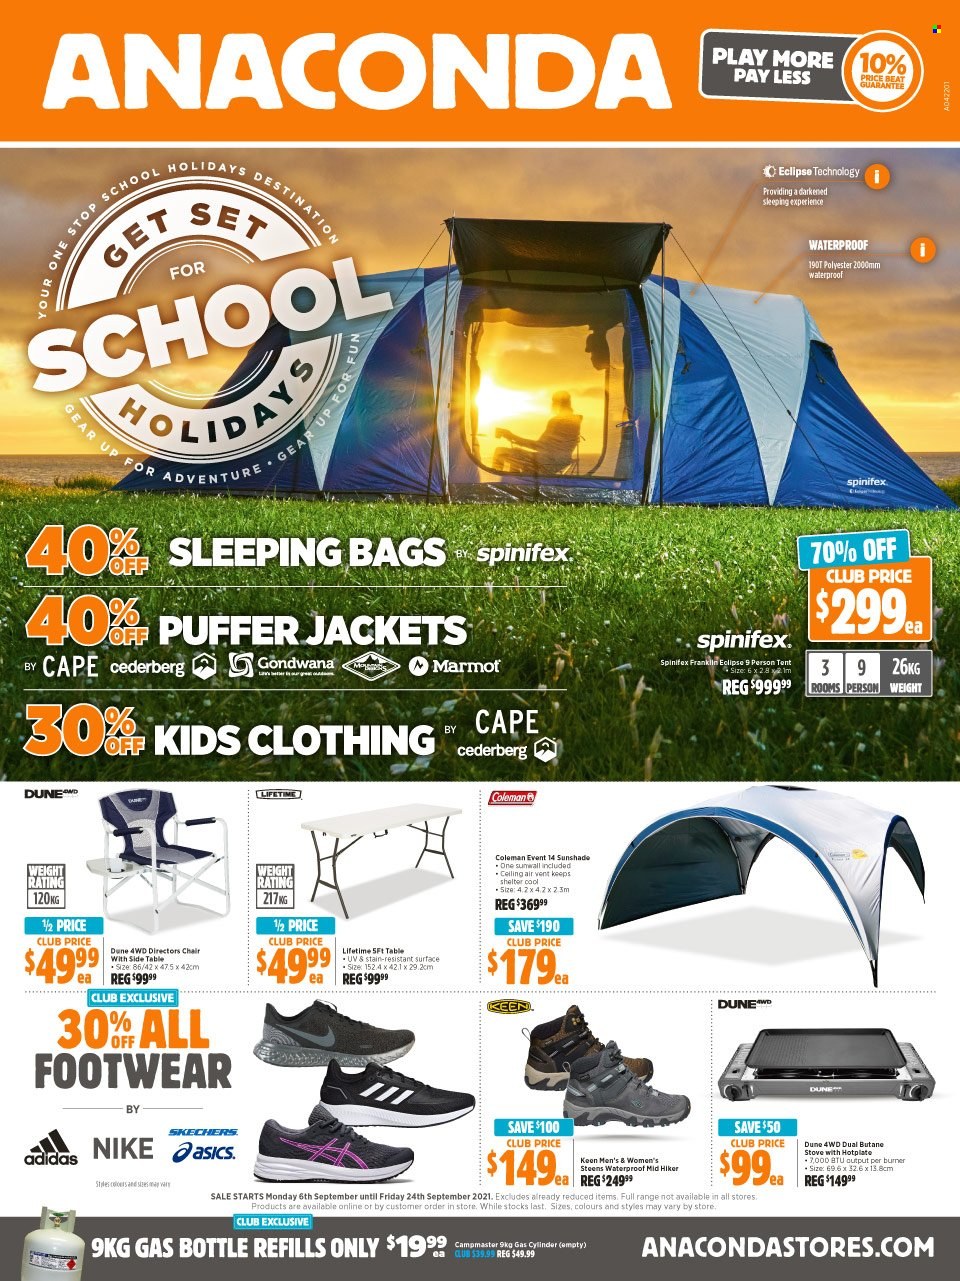 thumbnail - Anaconda Catalogue - 6 Sep 2021 - 24 Sep 2021 - Sales products - Adidas, Asics, Nike, Skechers, Coleman, table, chair, sidetable, jacket, puffer jacket, sleeping bag, tent, stove, gas bottle, Campmaster, Eclipse. Page 1.